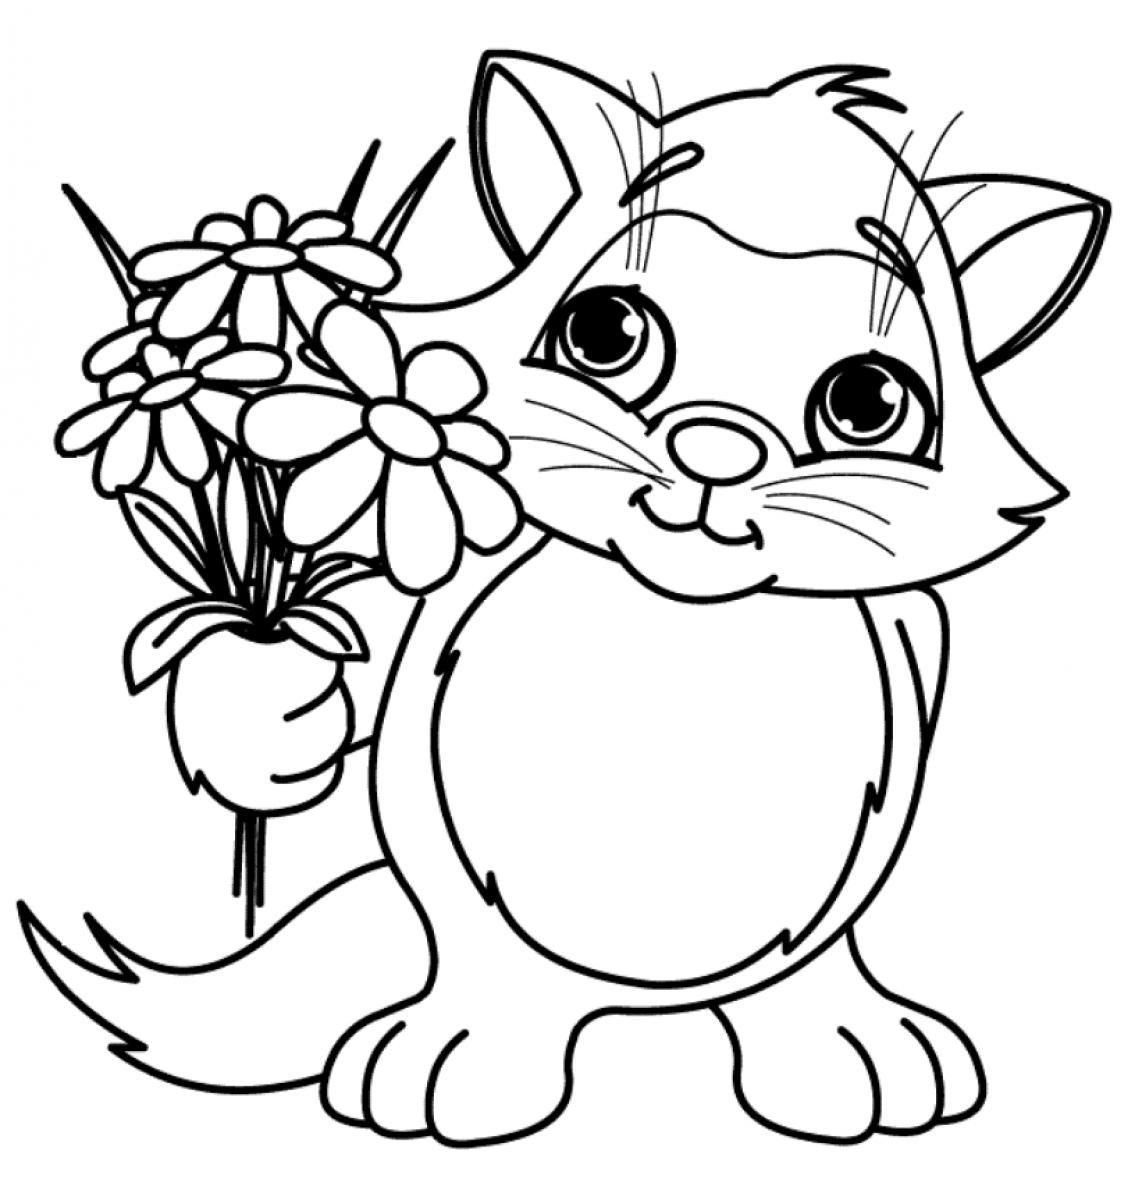 Spring Pictures Coloring Sheets - Coloring